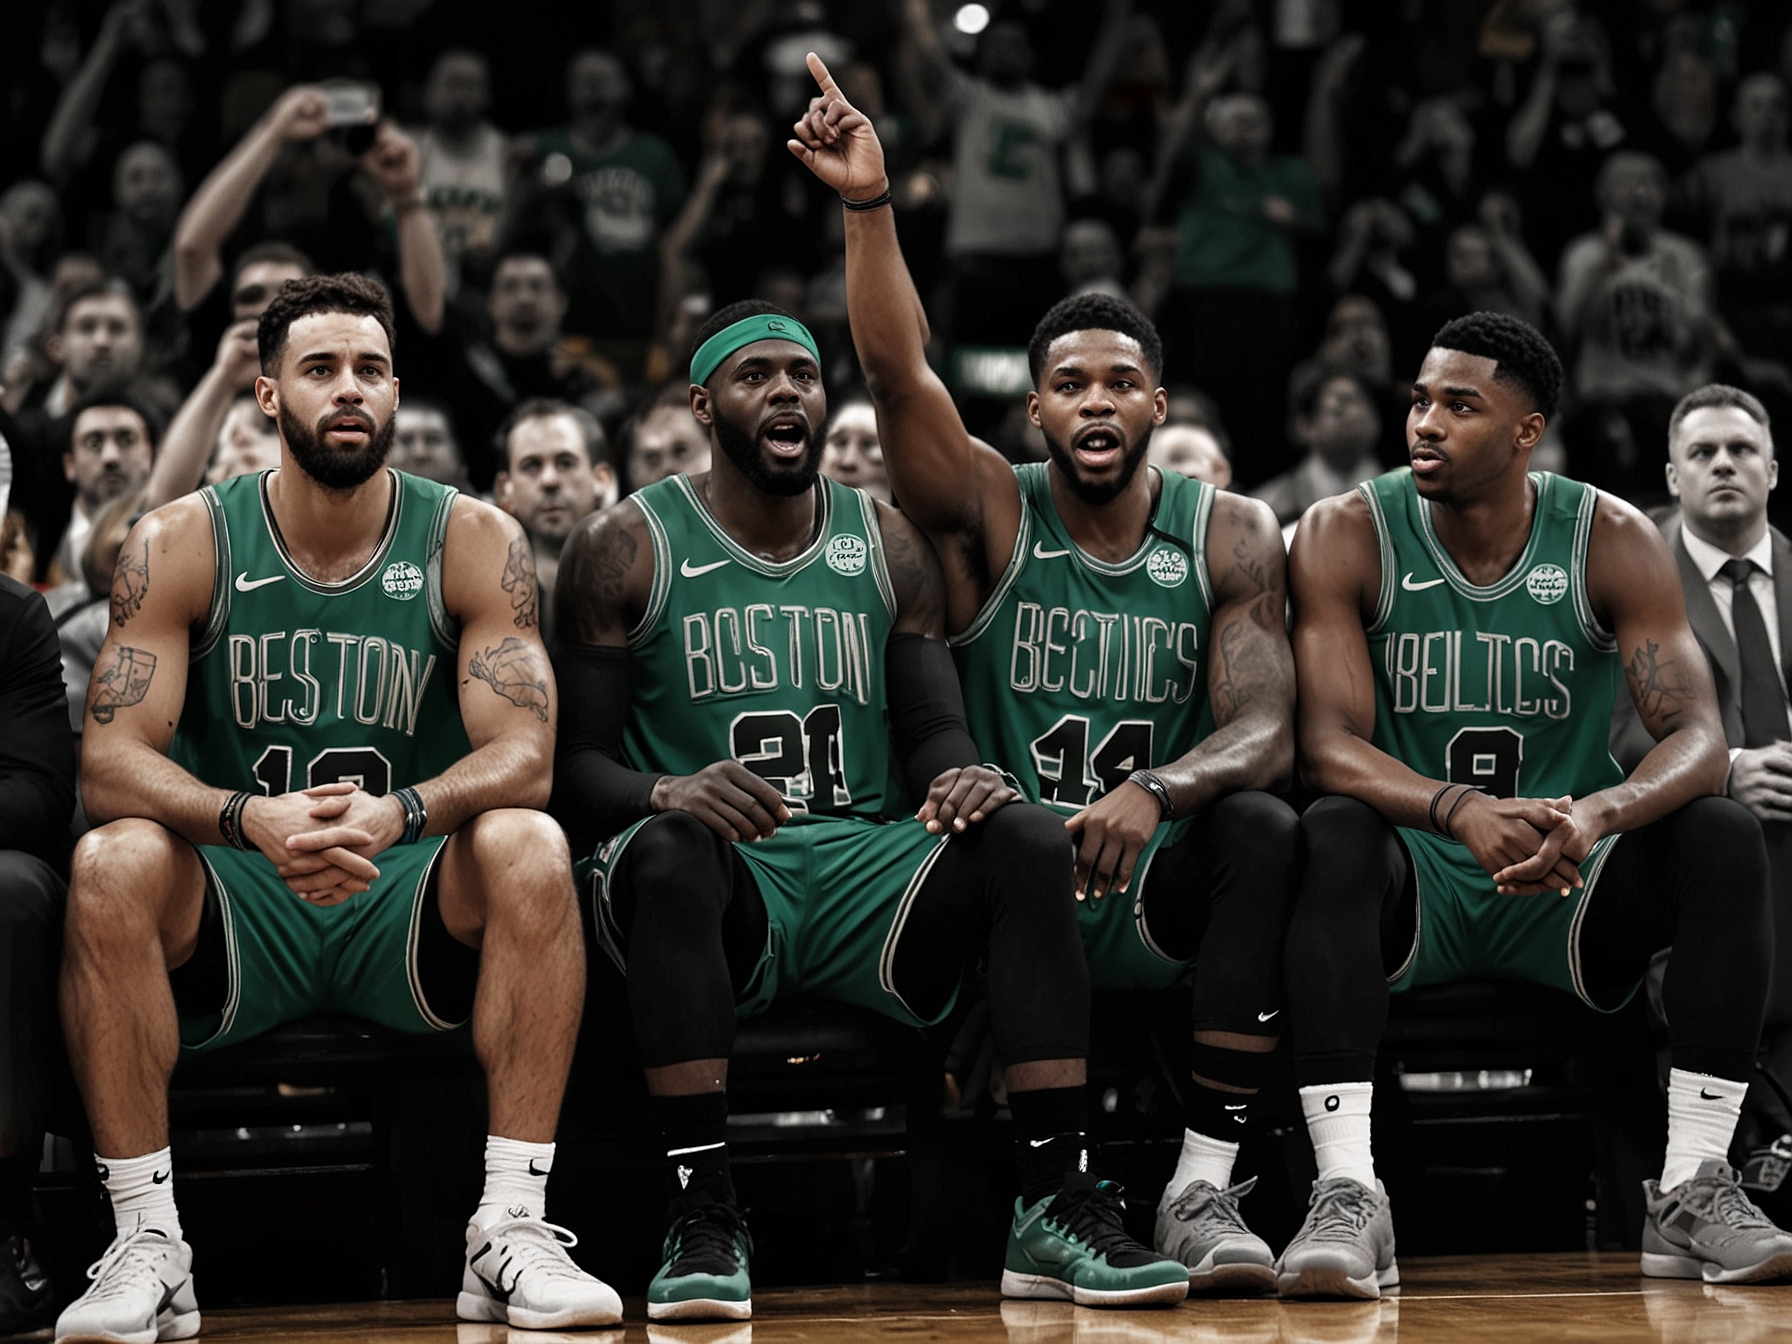 Boston Celtics players celebrate on the bench after a successful three-point shot, highlighting their commanding lead and the depth of the team.